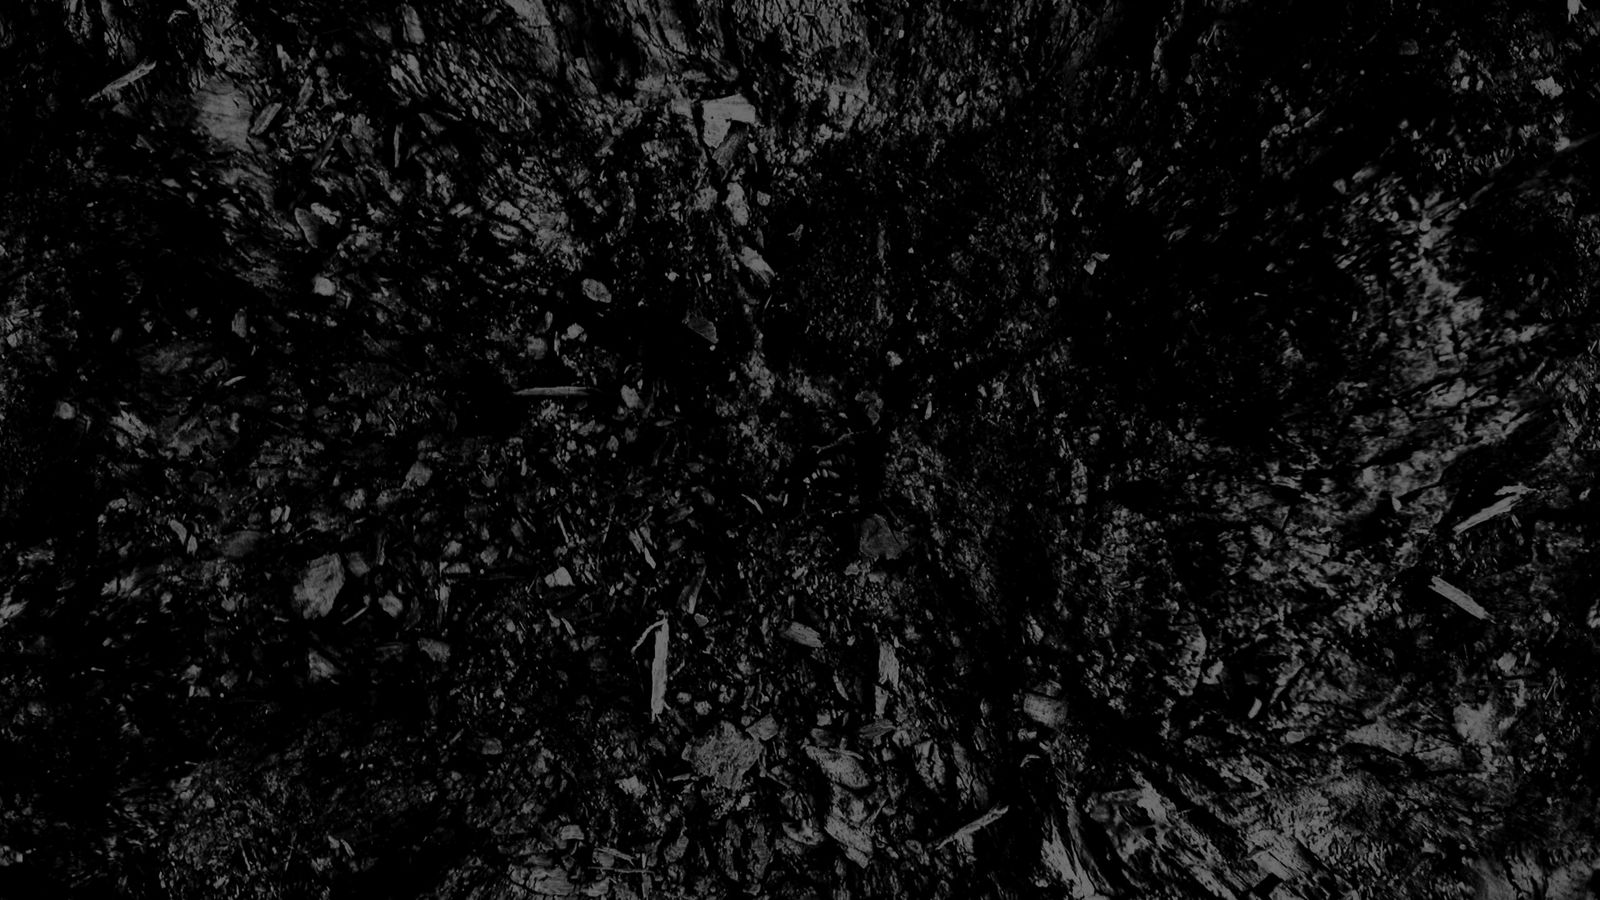 Download wallpaper 1600x900 dark, black and white, abstract, black  background widescreen 16:9 hd background